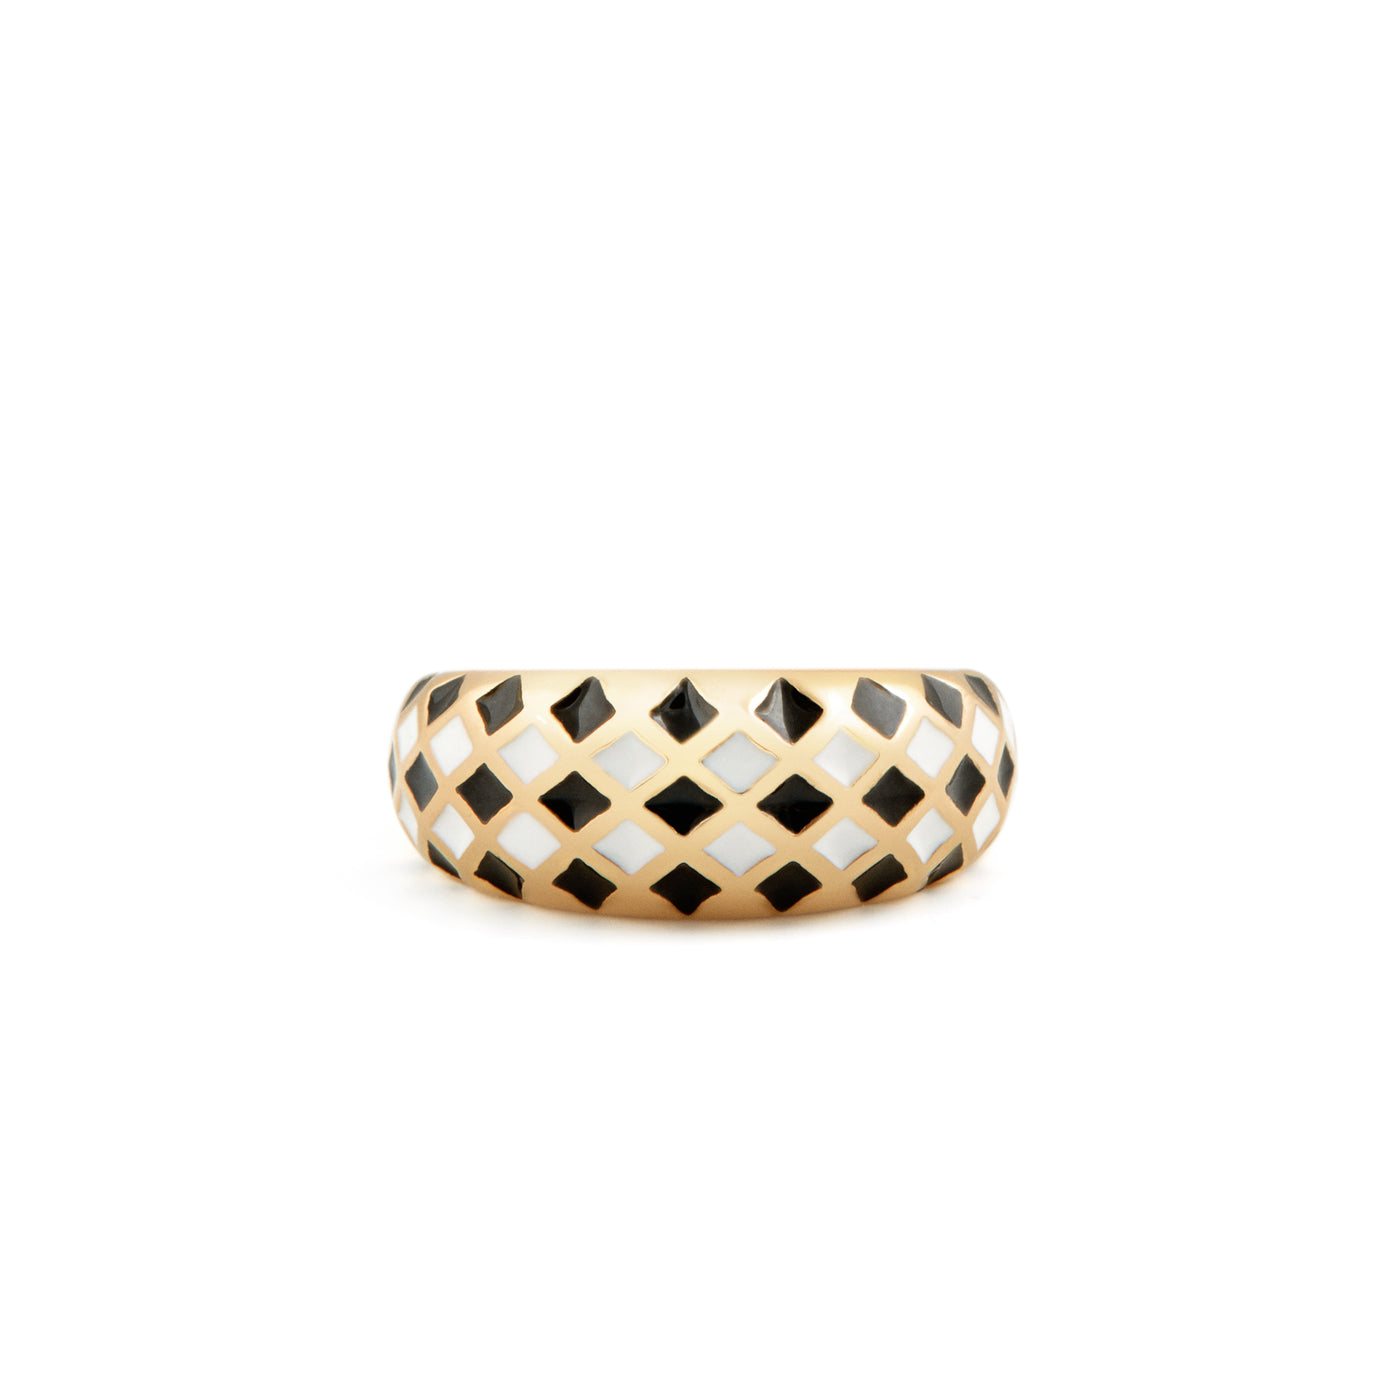 Image Ring - Gold Plated